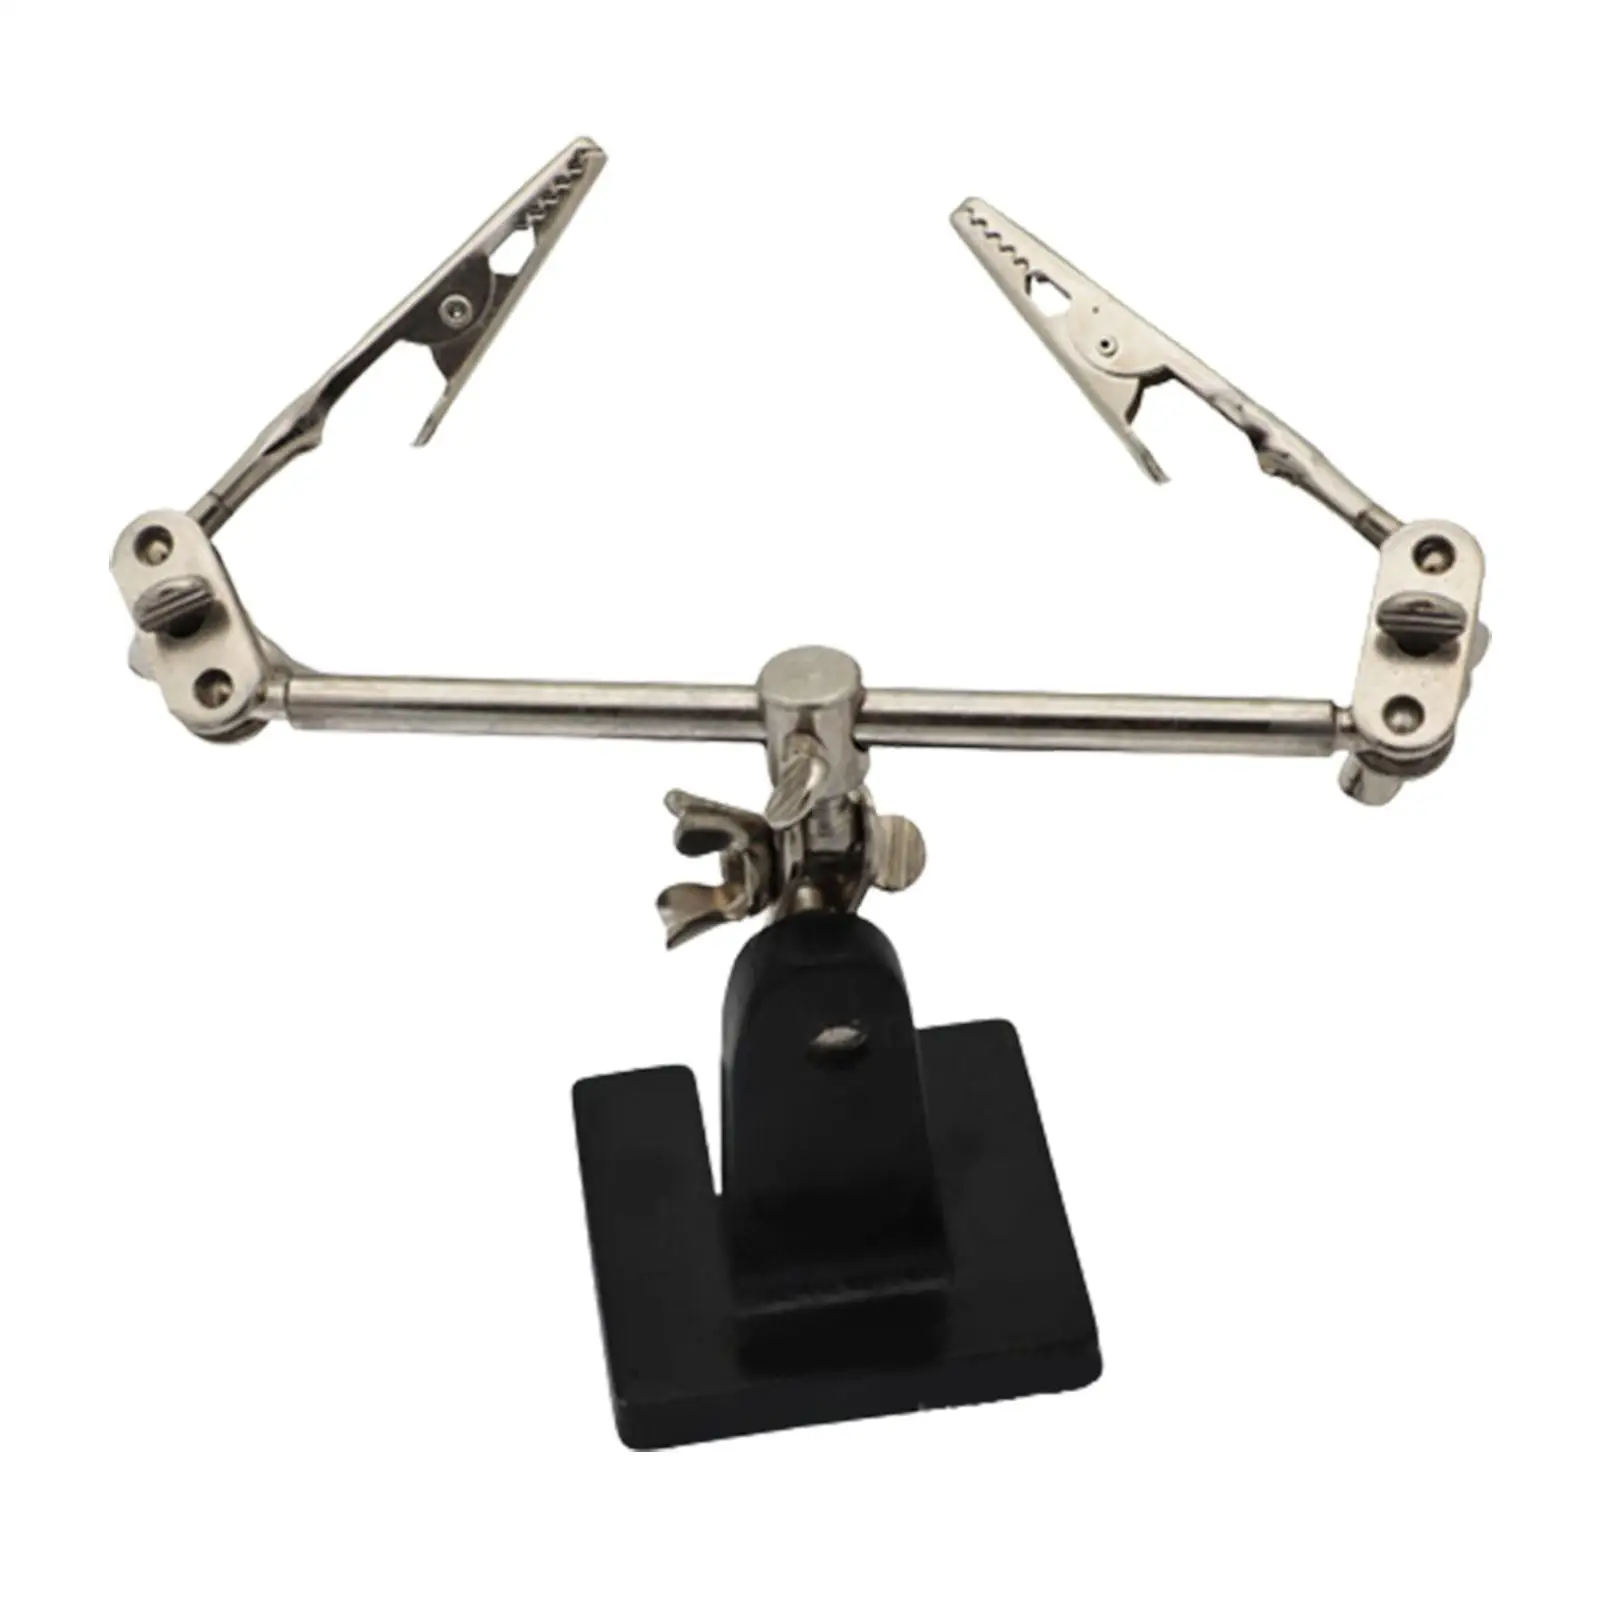 Soldering Third hand metal Stand Clamp Helping Hands for Jewelry Hobby Crafts